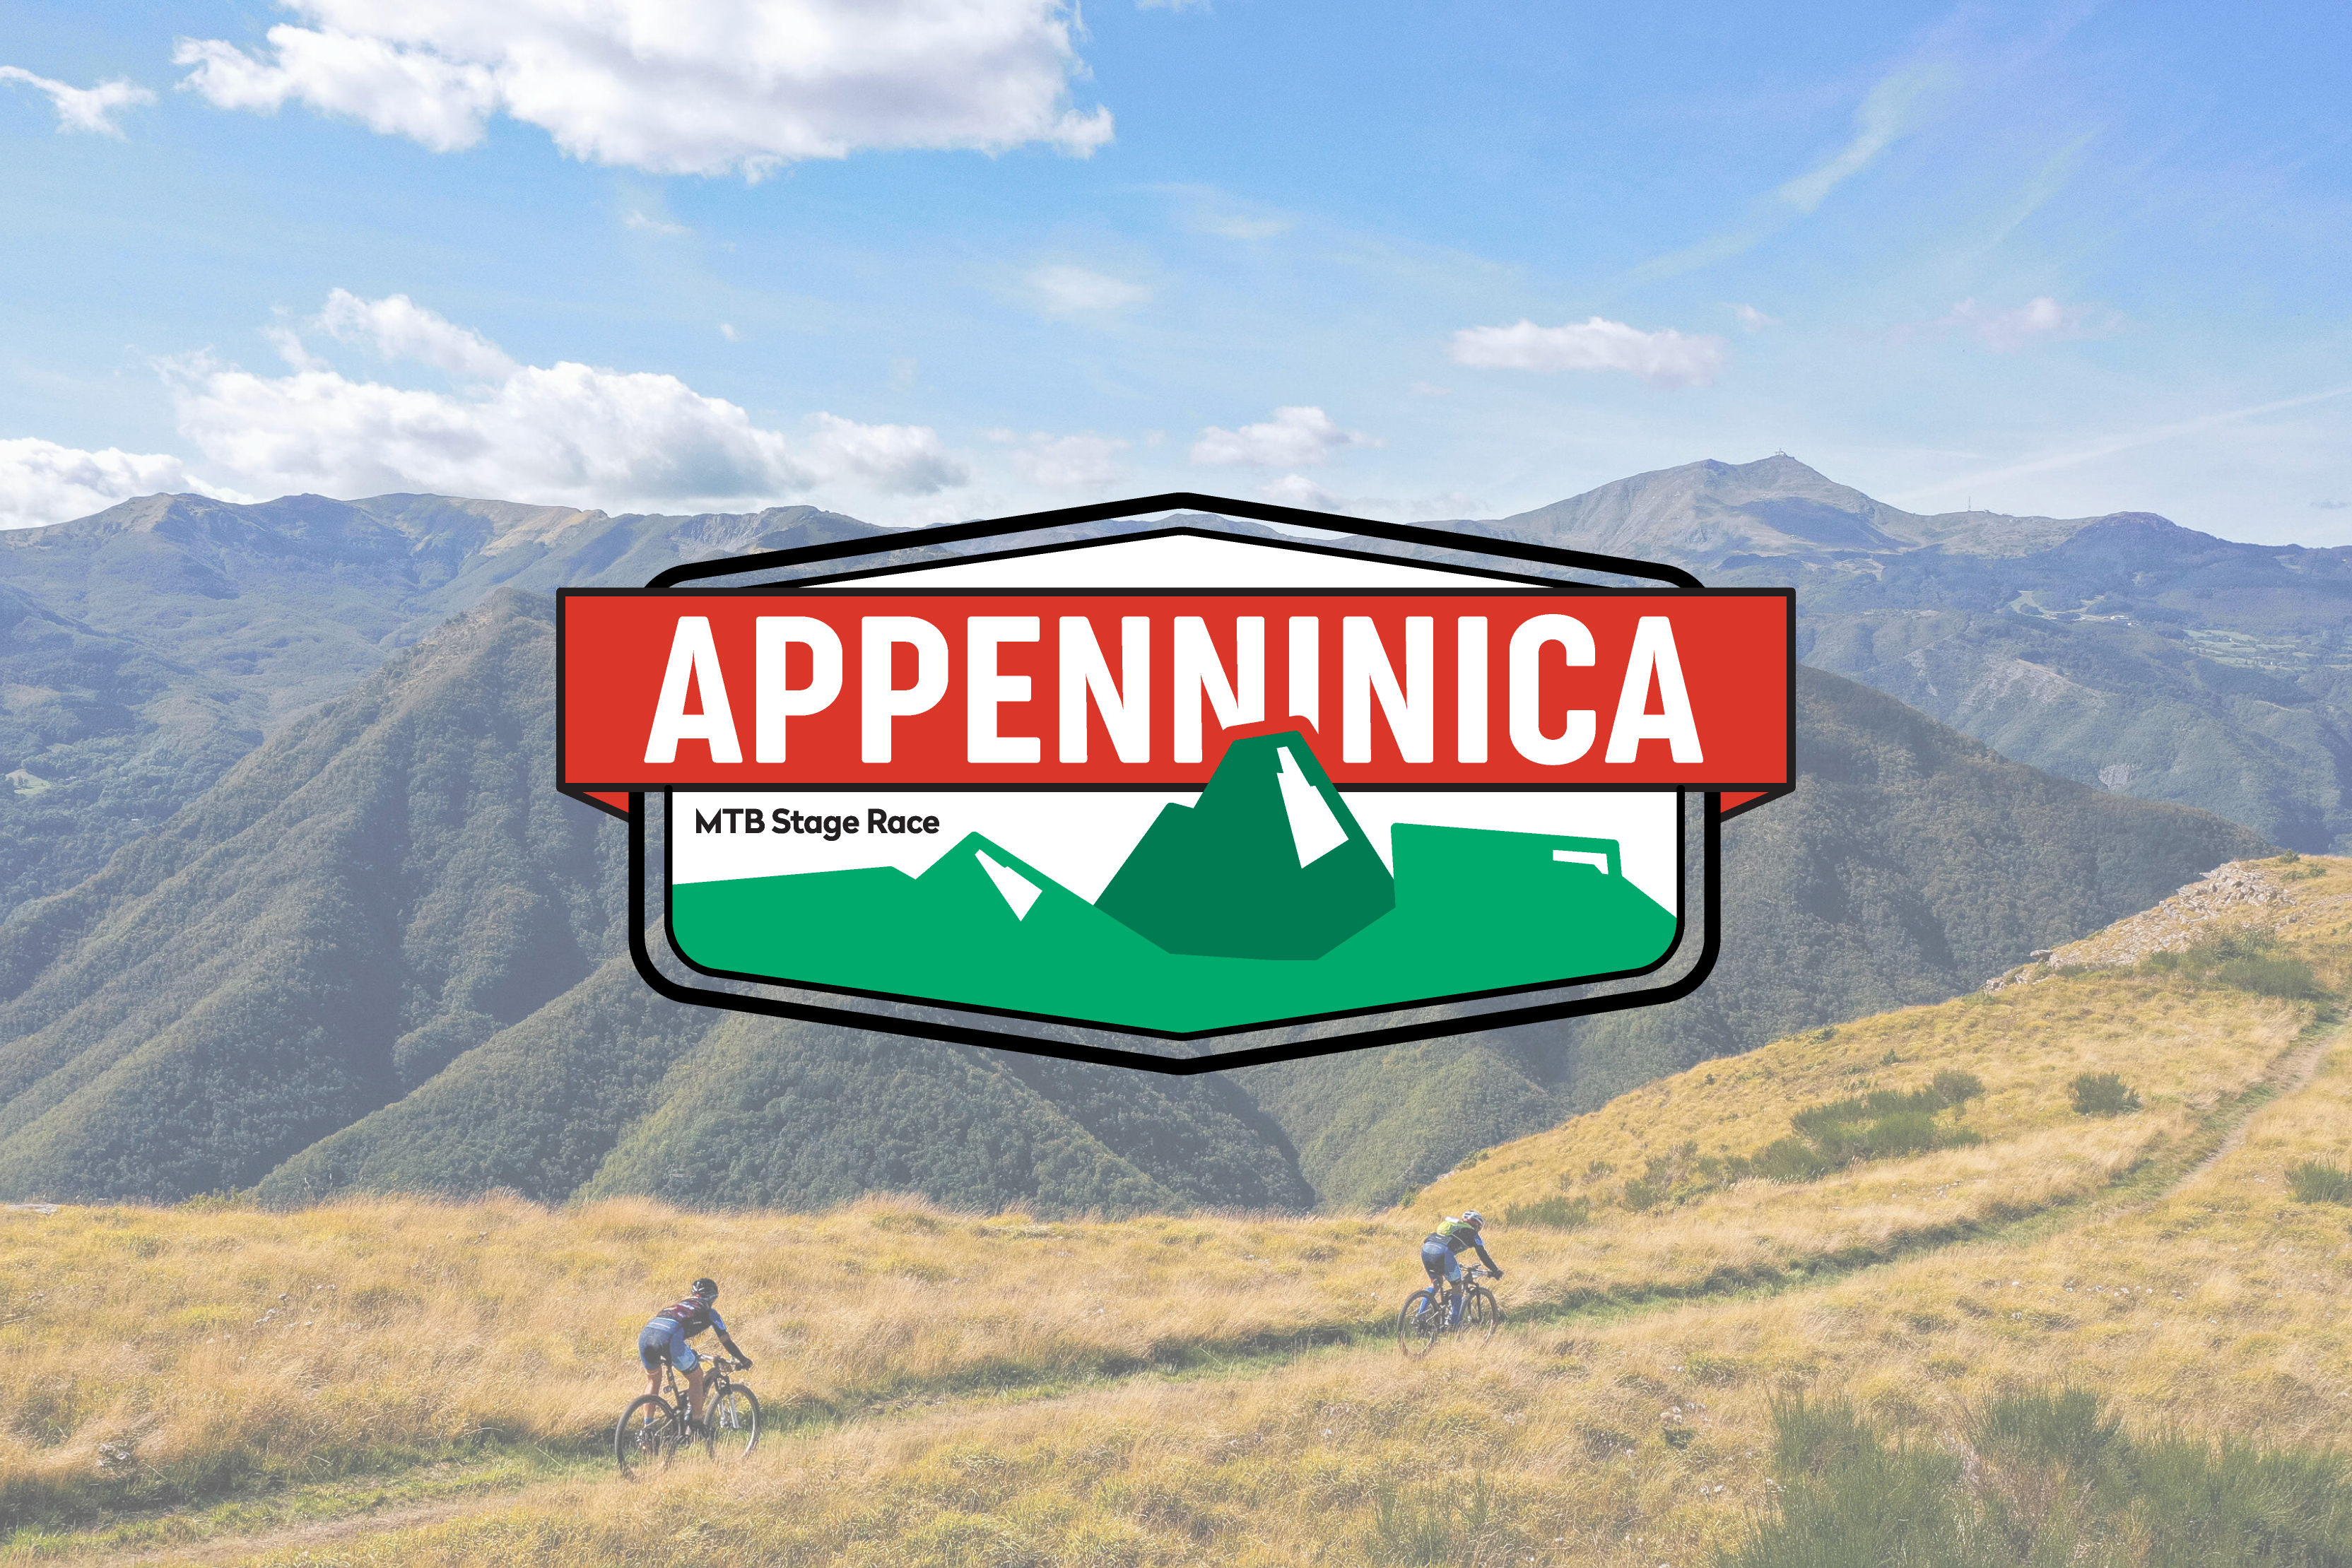 The Apennines star in the new Appenninica logo